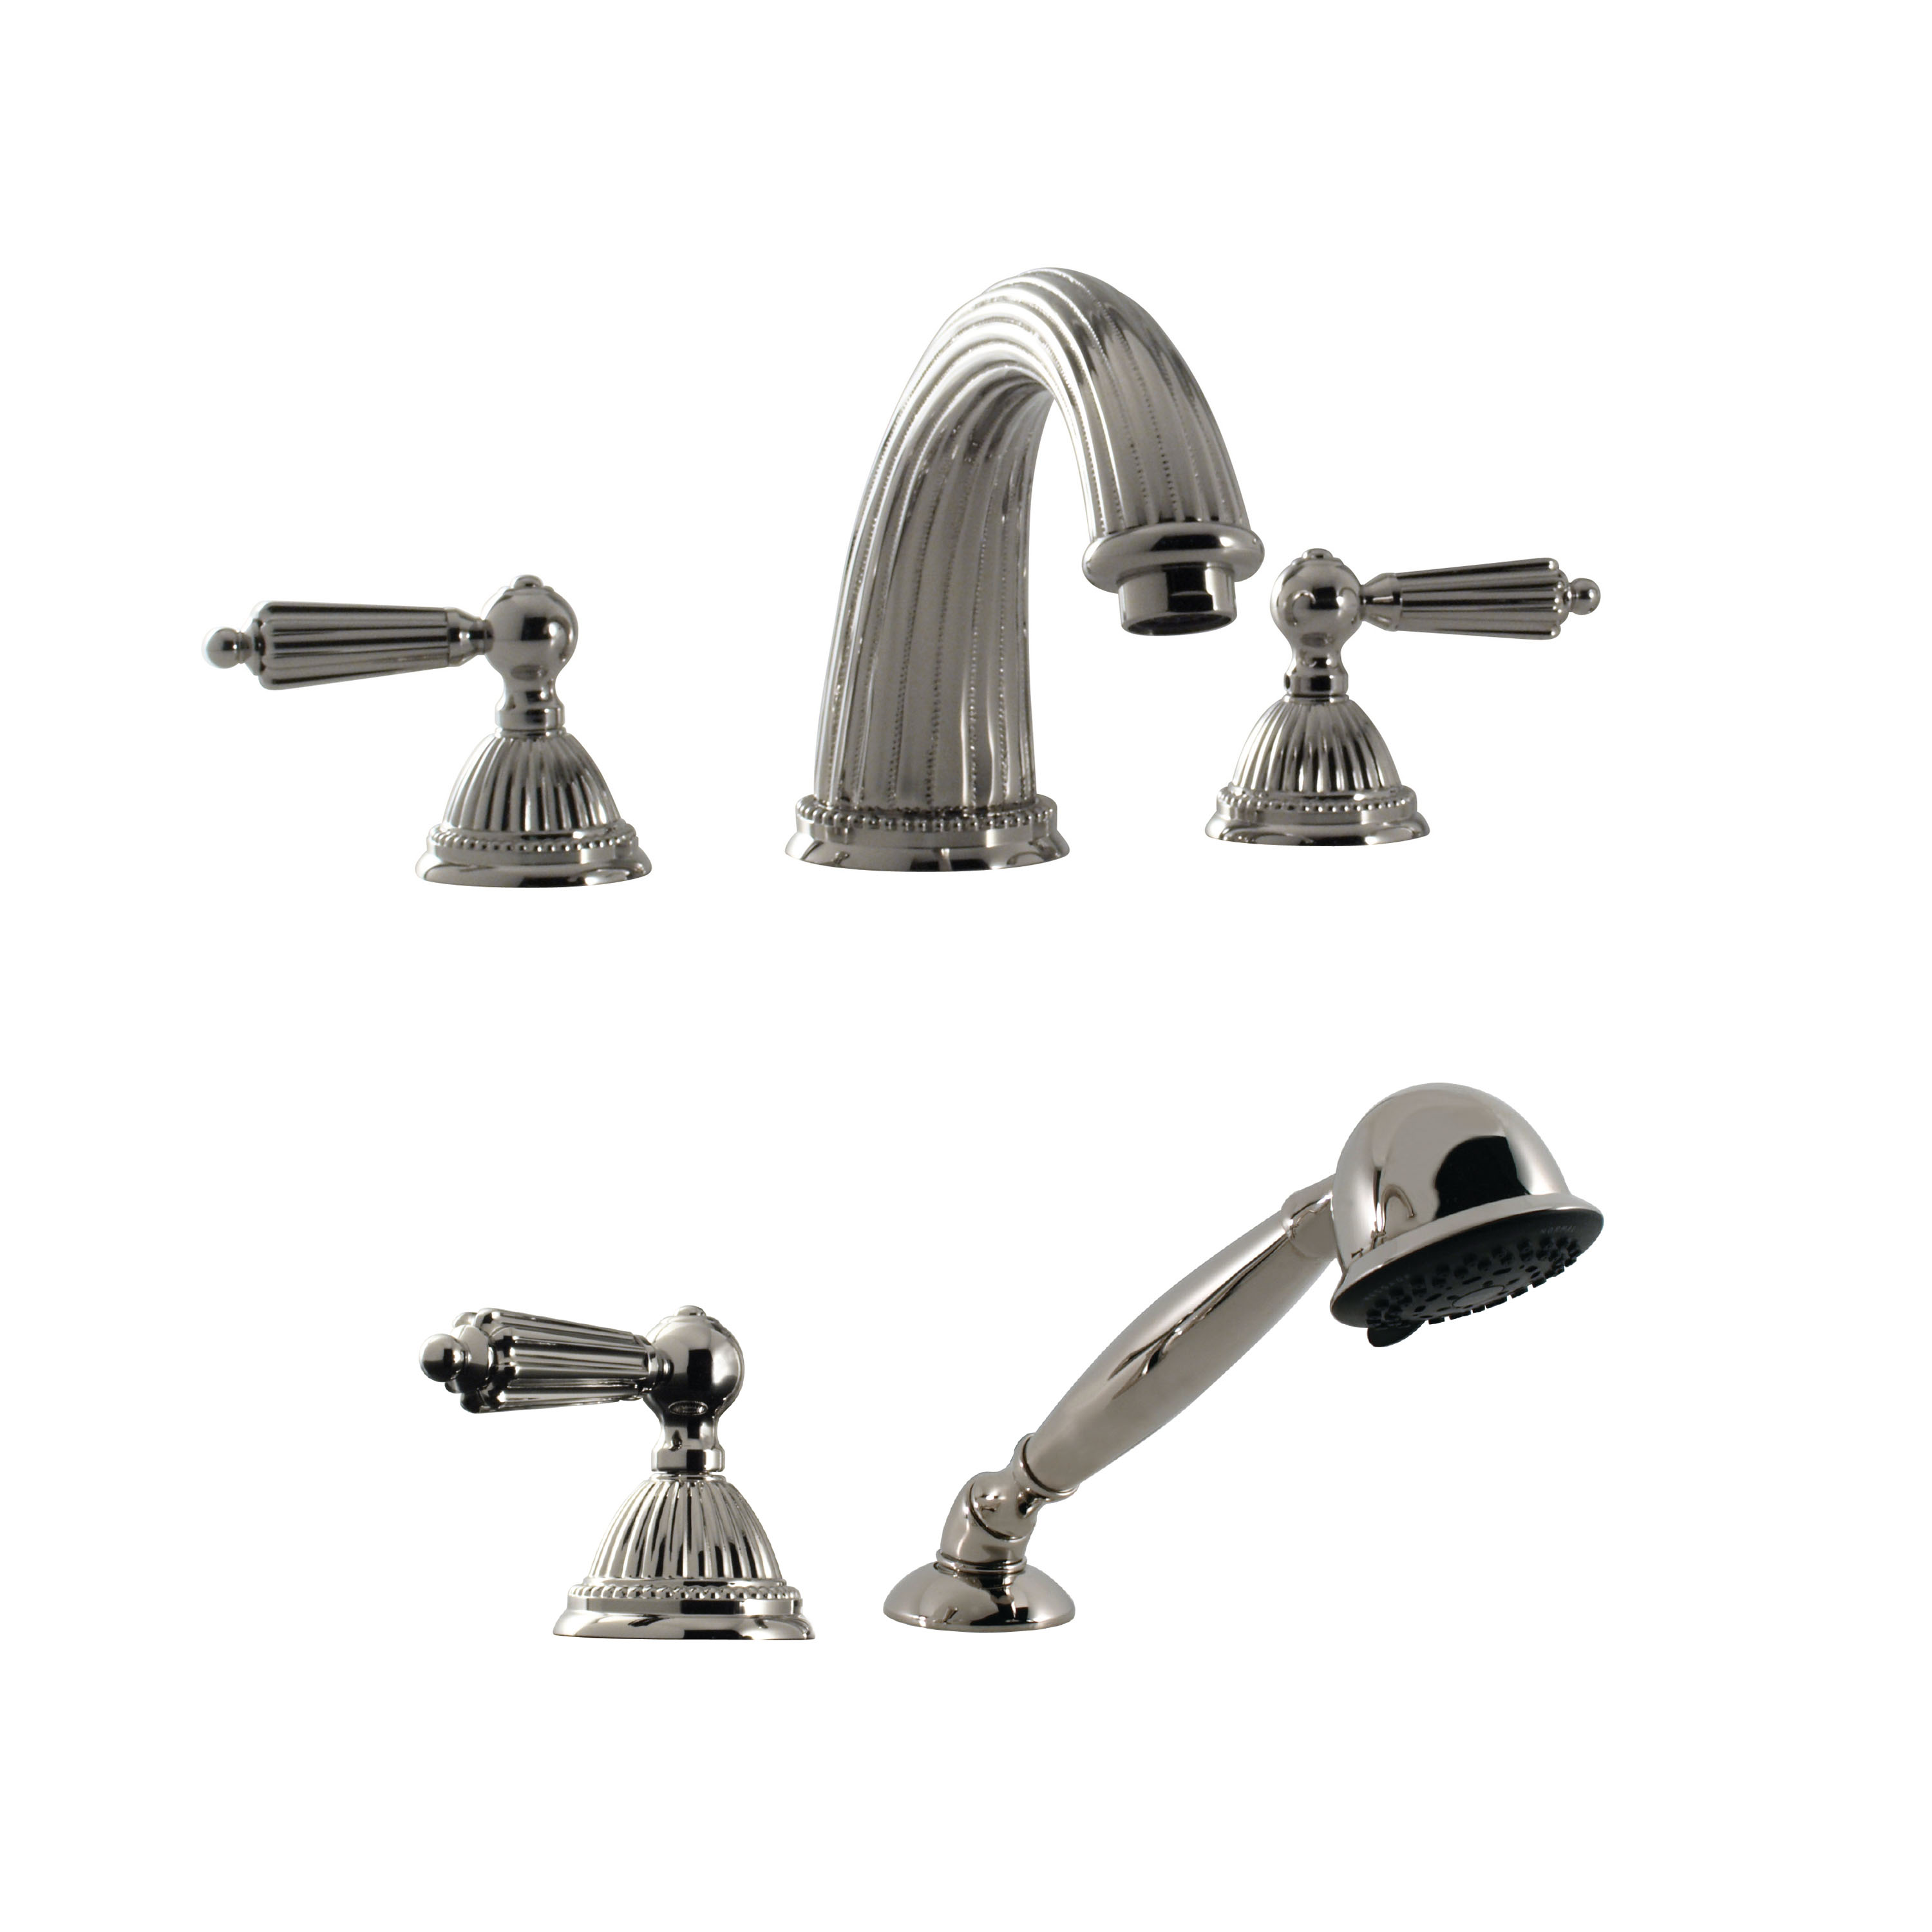 Santec 1155LL10-TM Monarch Roman Tub Filler Set with Hand Held Shower with "LL" Handles - Polished Chrome